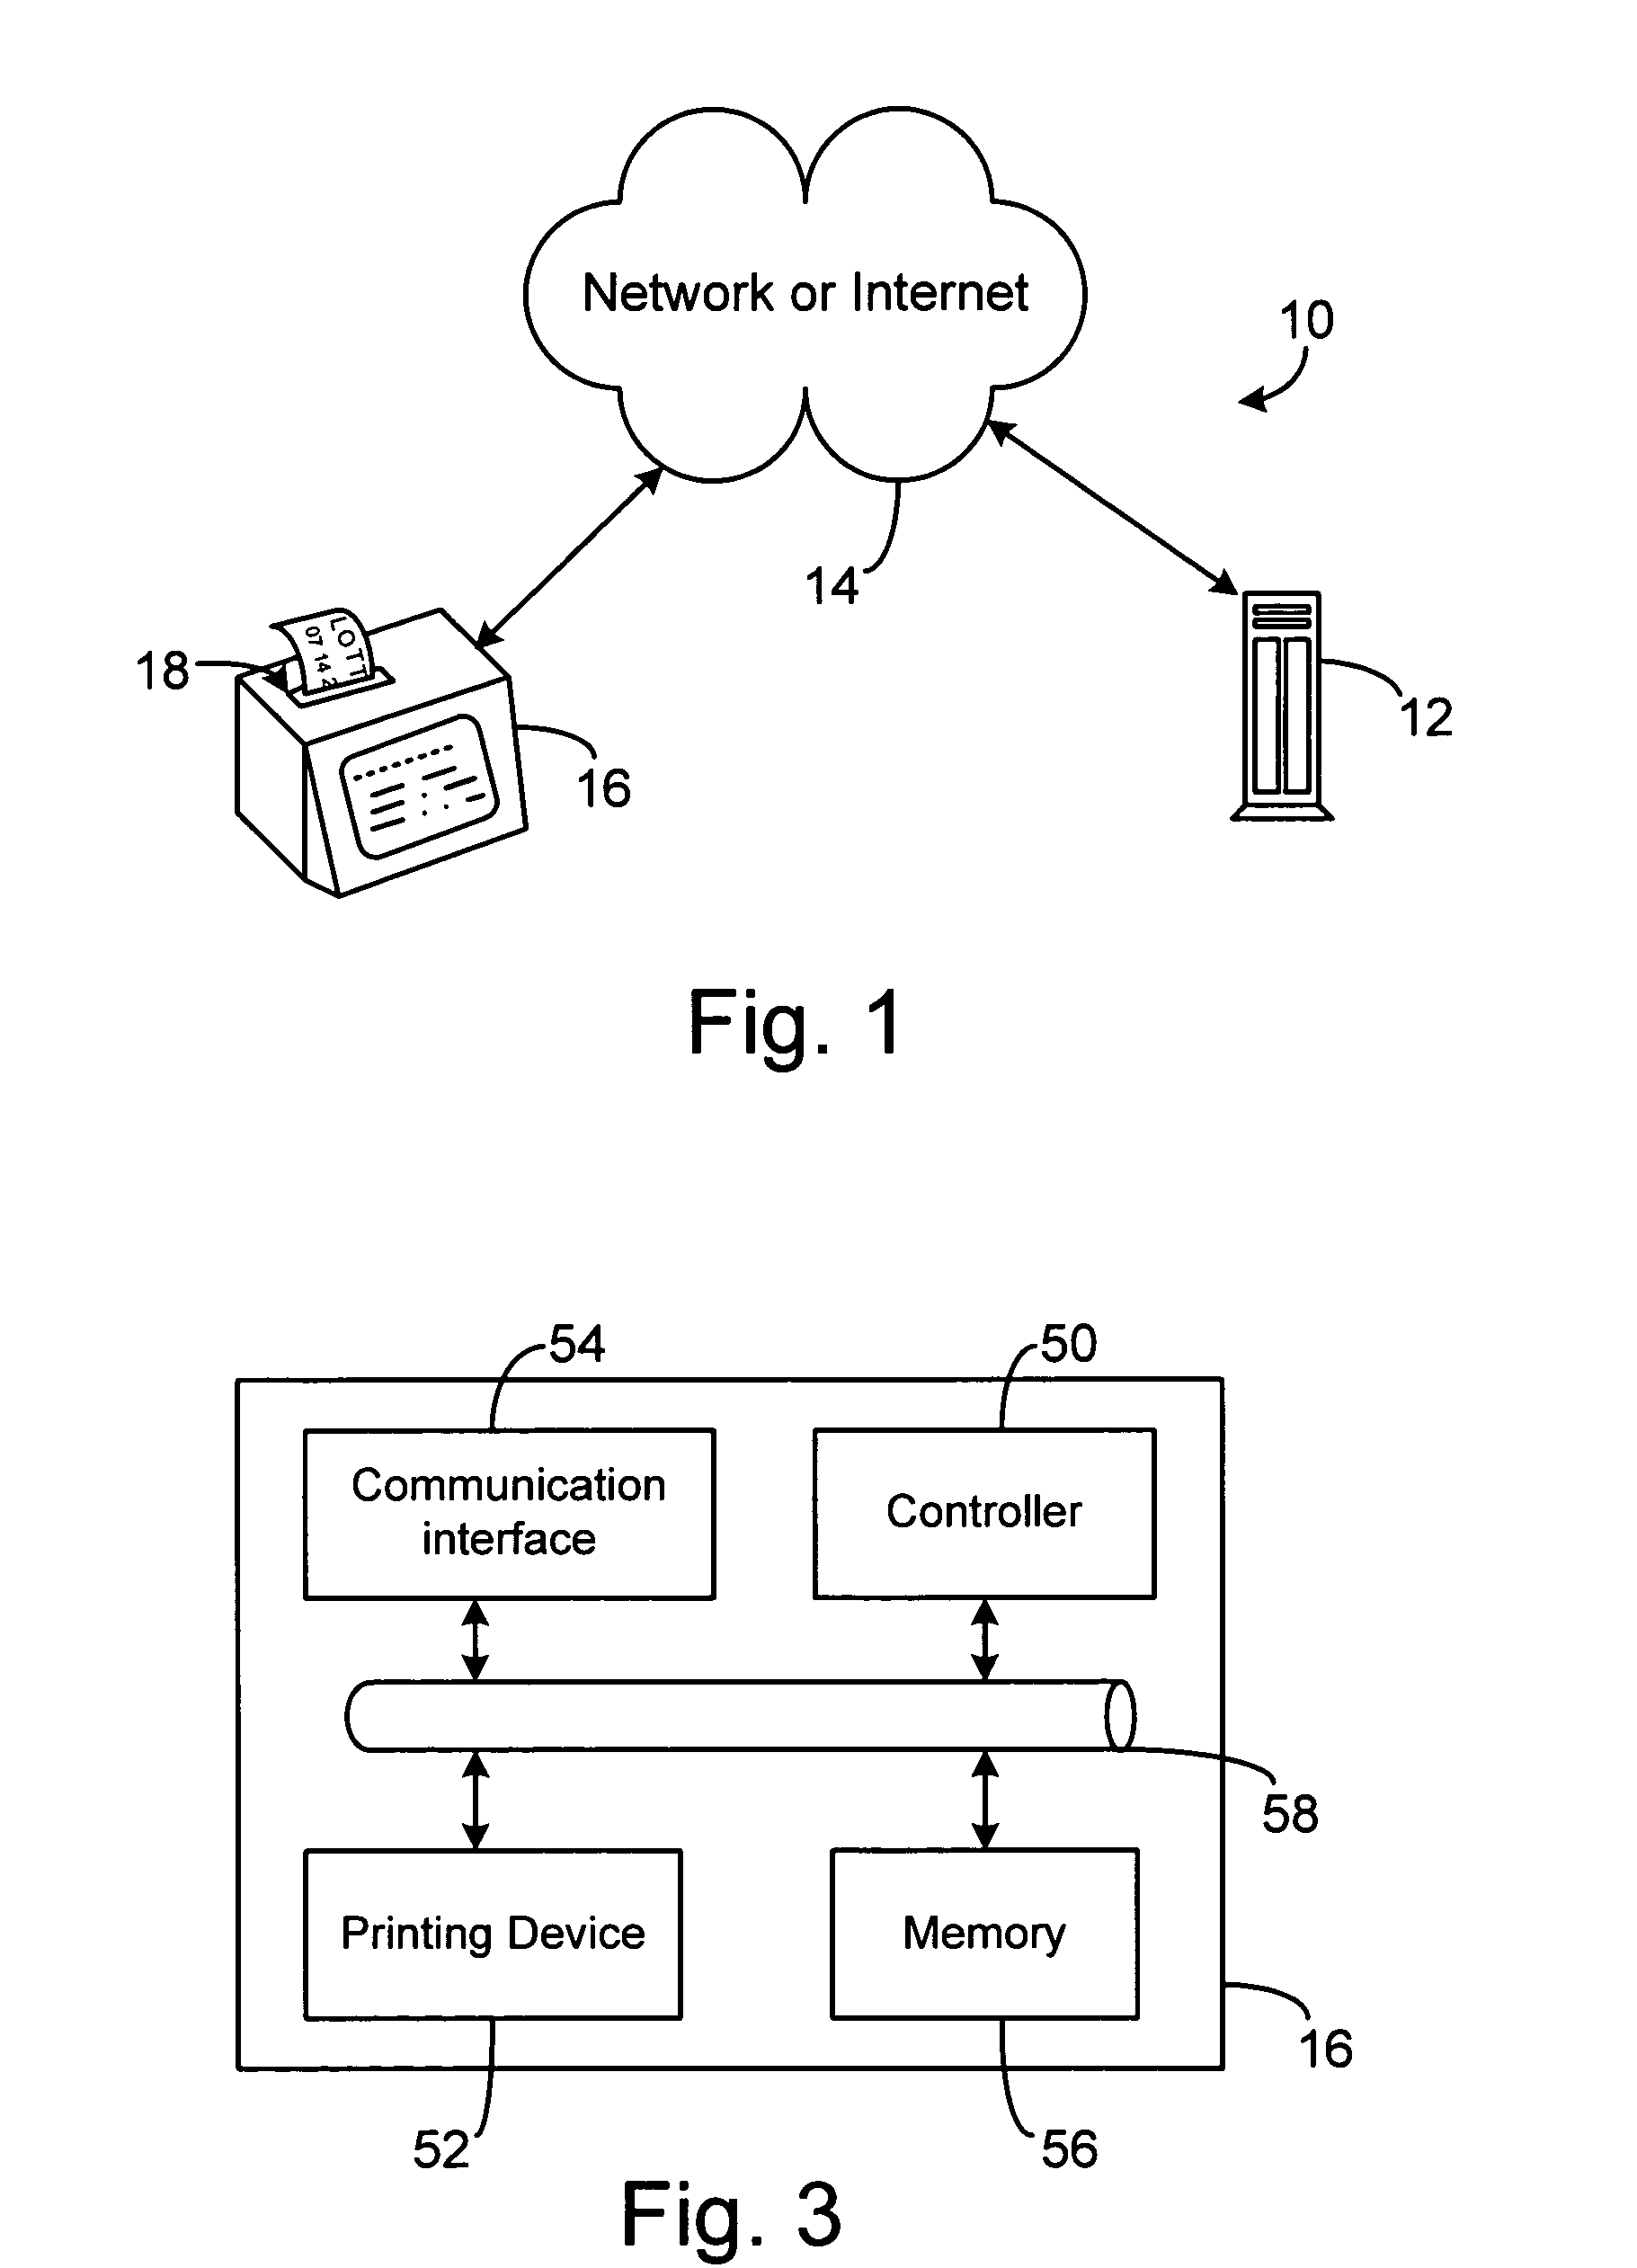 System and method for securing on-line documents using authentication codes